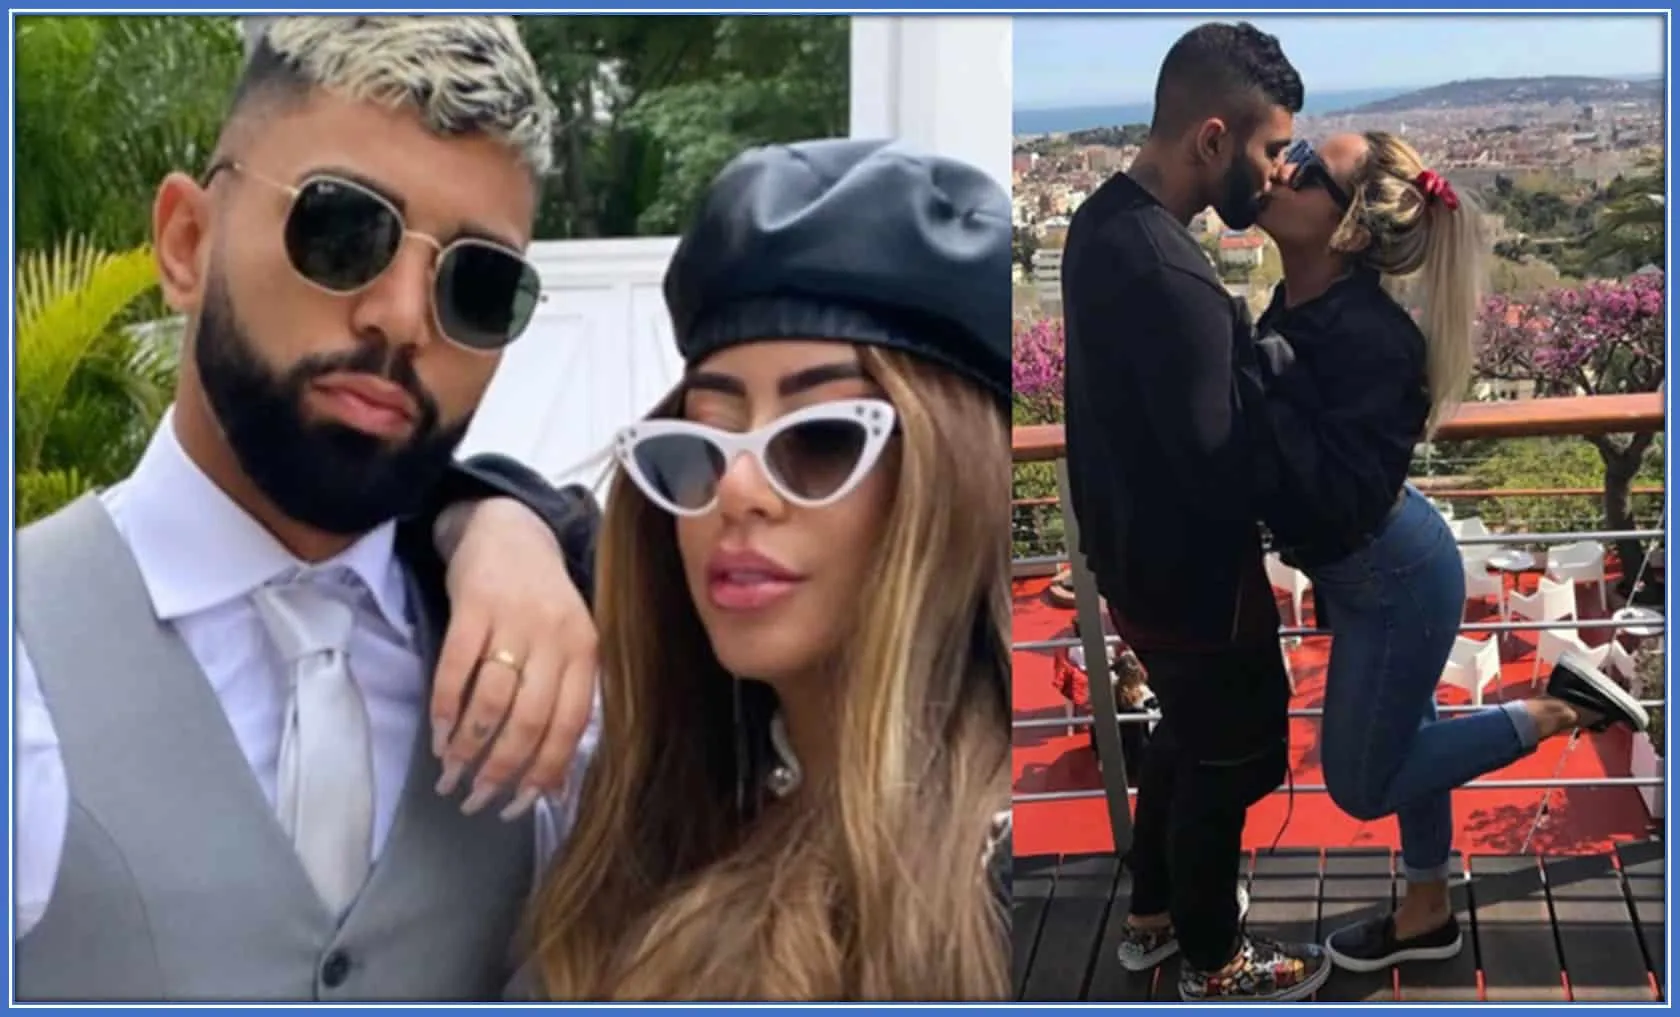 It appears nobody can stop Gabigol and Rafaella at this time.